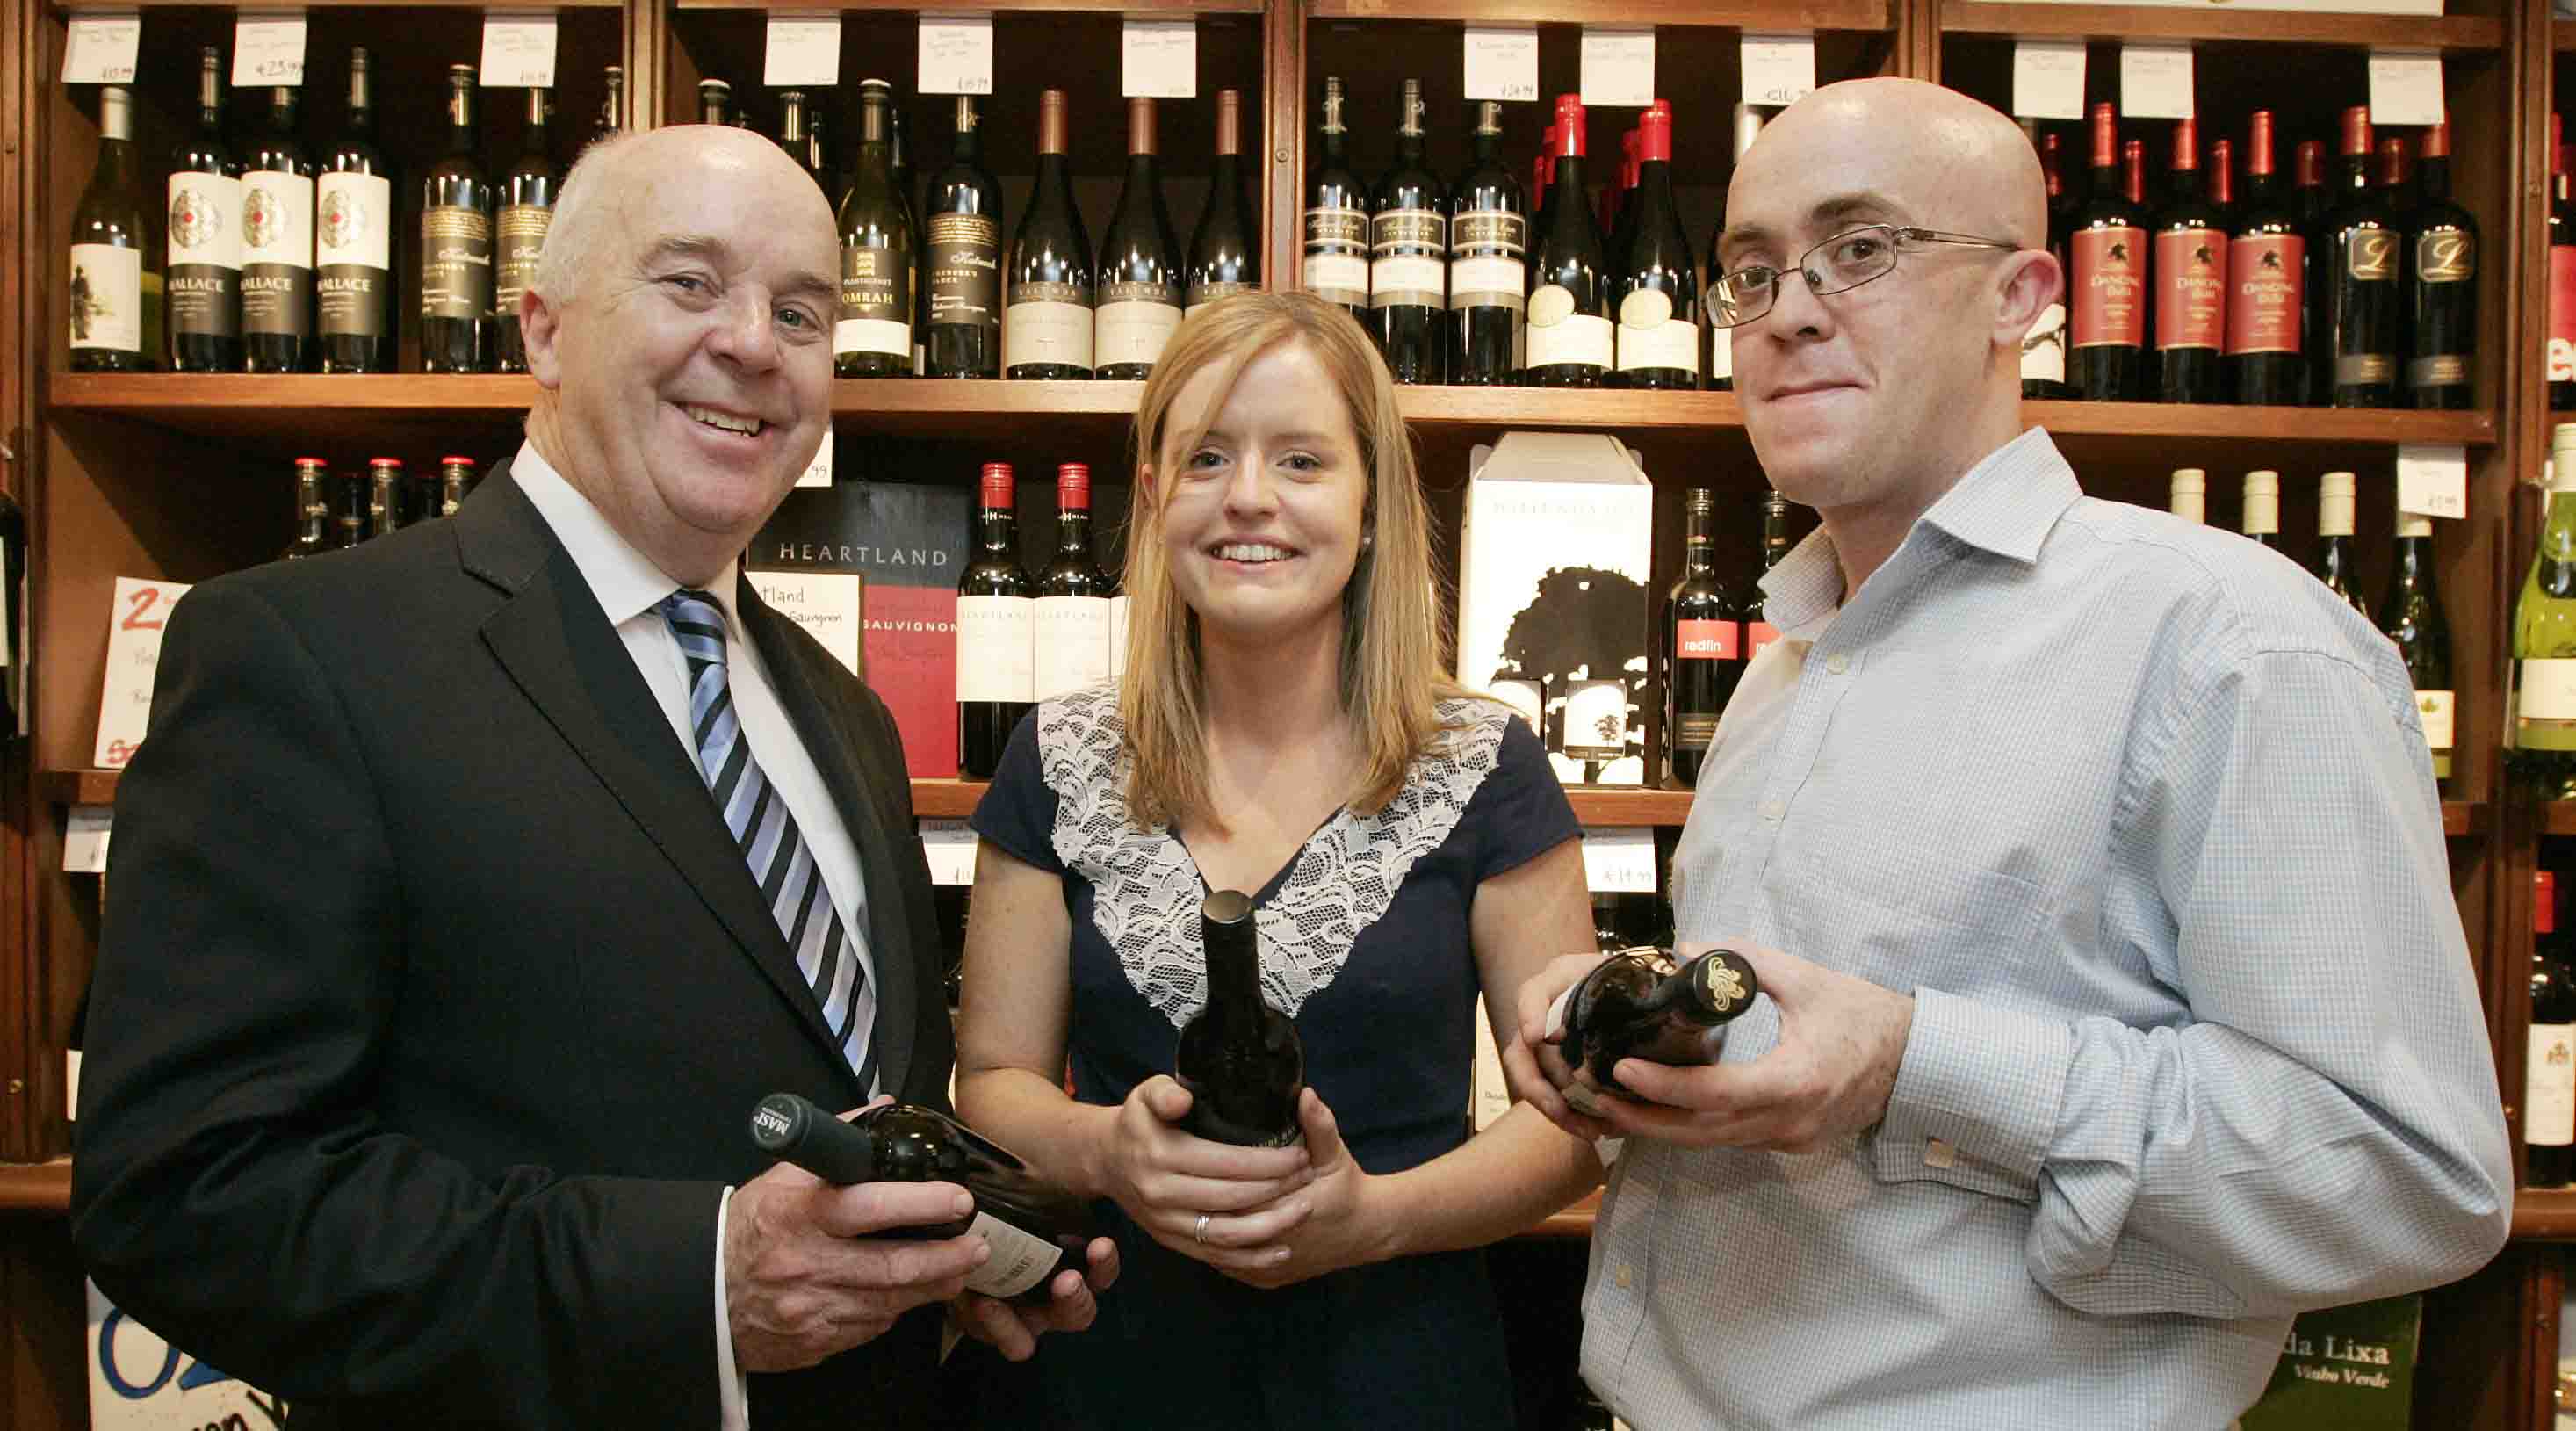 From left: Shay Connolly, Catherine Noakes and Garret Connolly.